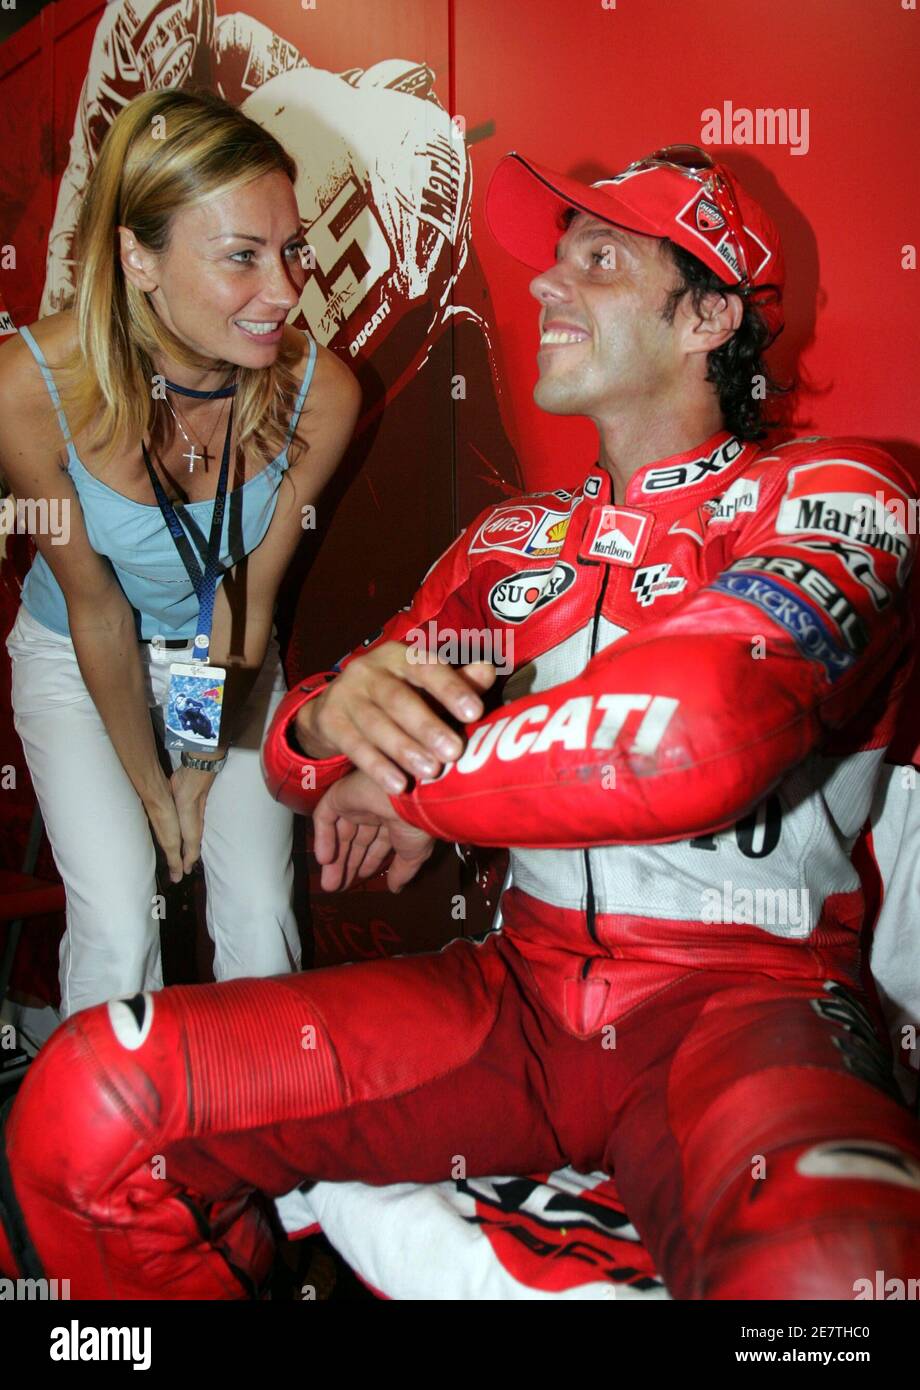 Motogp Rider Capirossi Of Italy Celebrates With Wife After Capturing Pole Position At Twin Ring Motegi Circuit In Japan Motogp Rider Loris Capirossi R Of Italy Smiles With His Wife Ingrid Tence